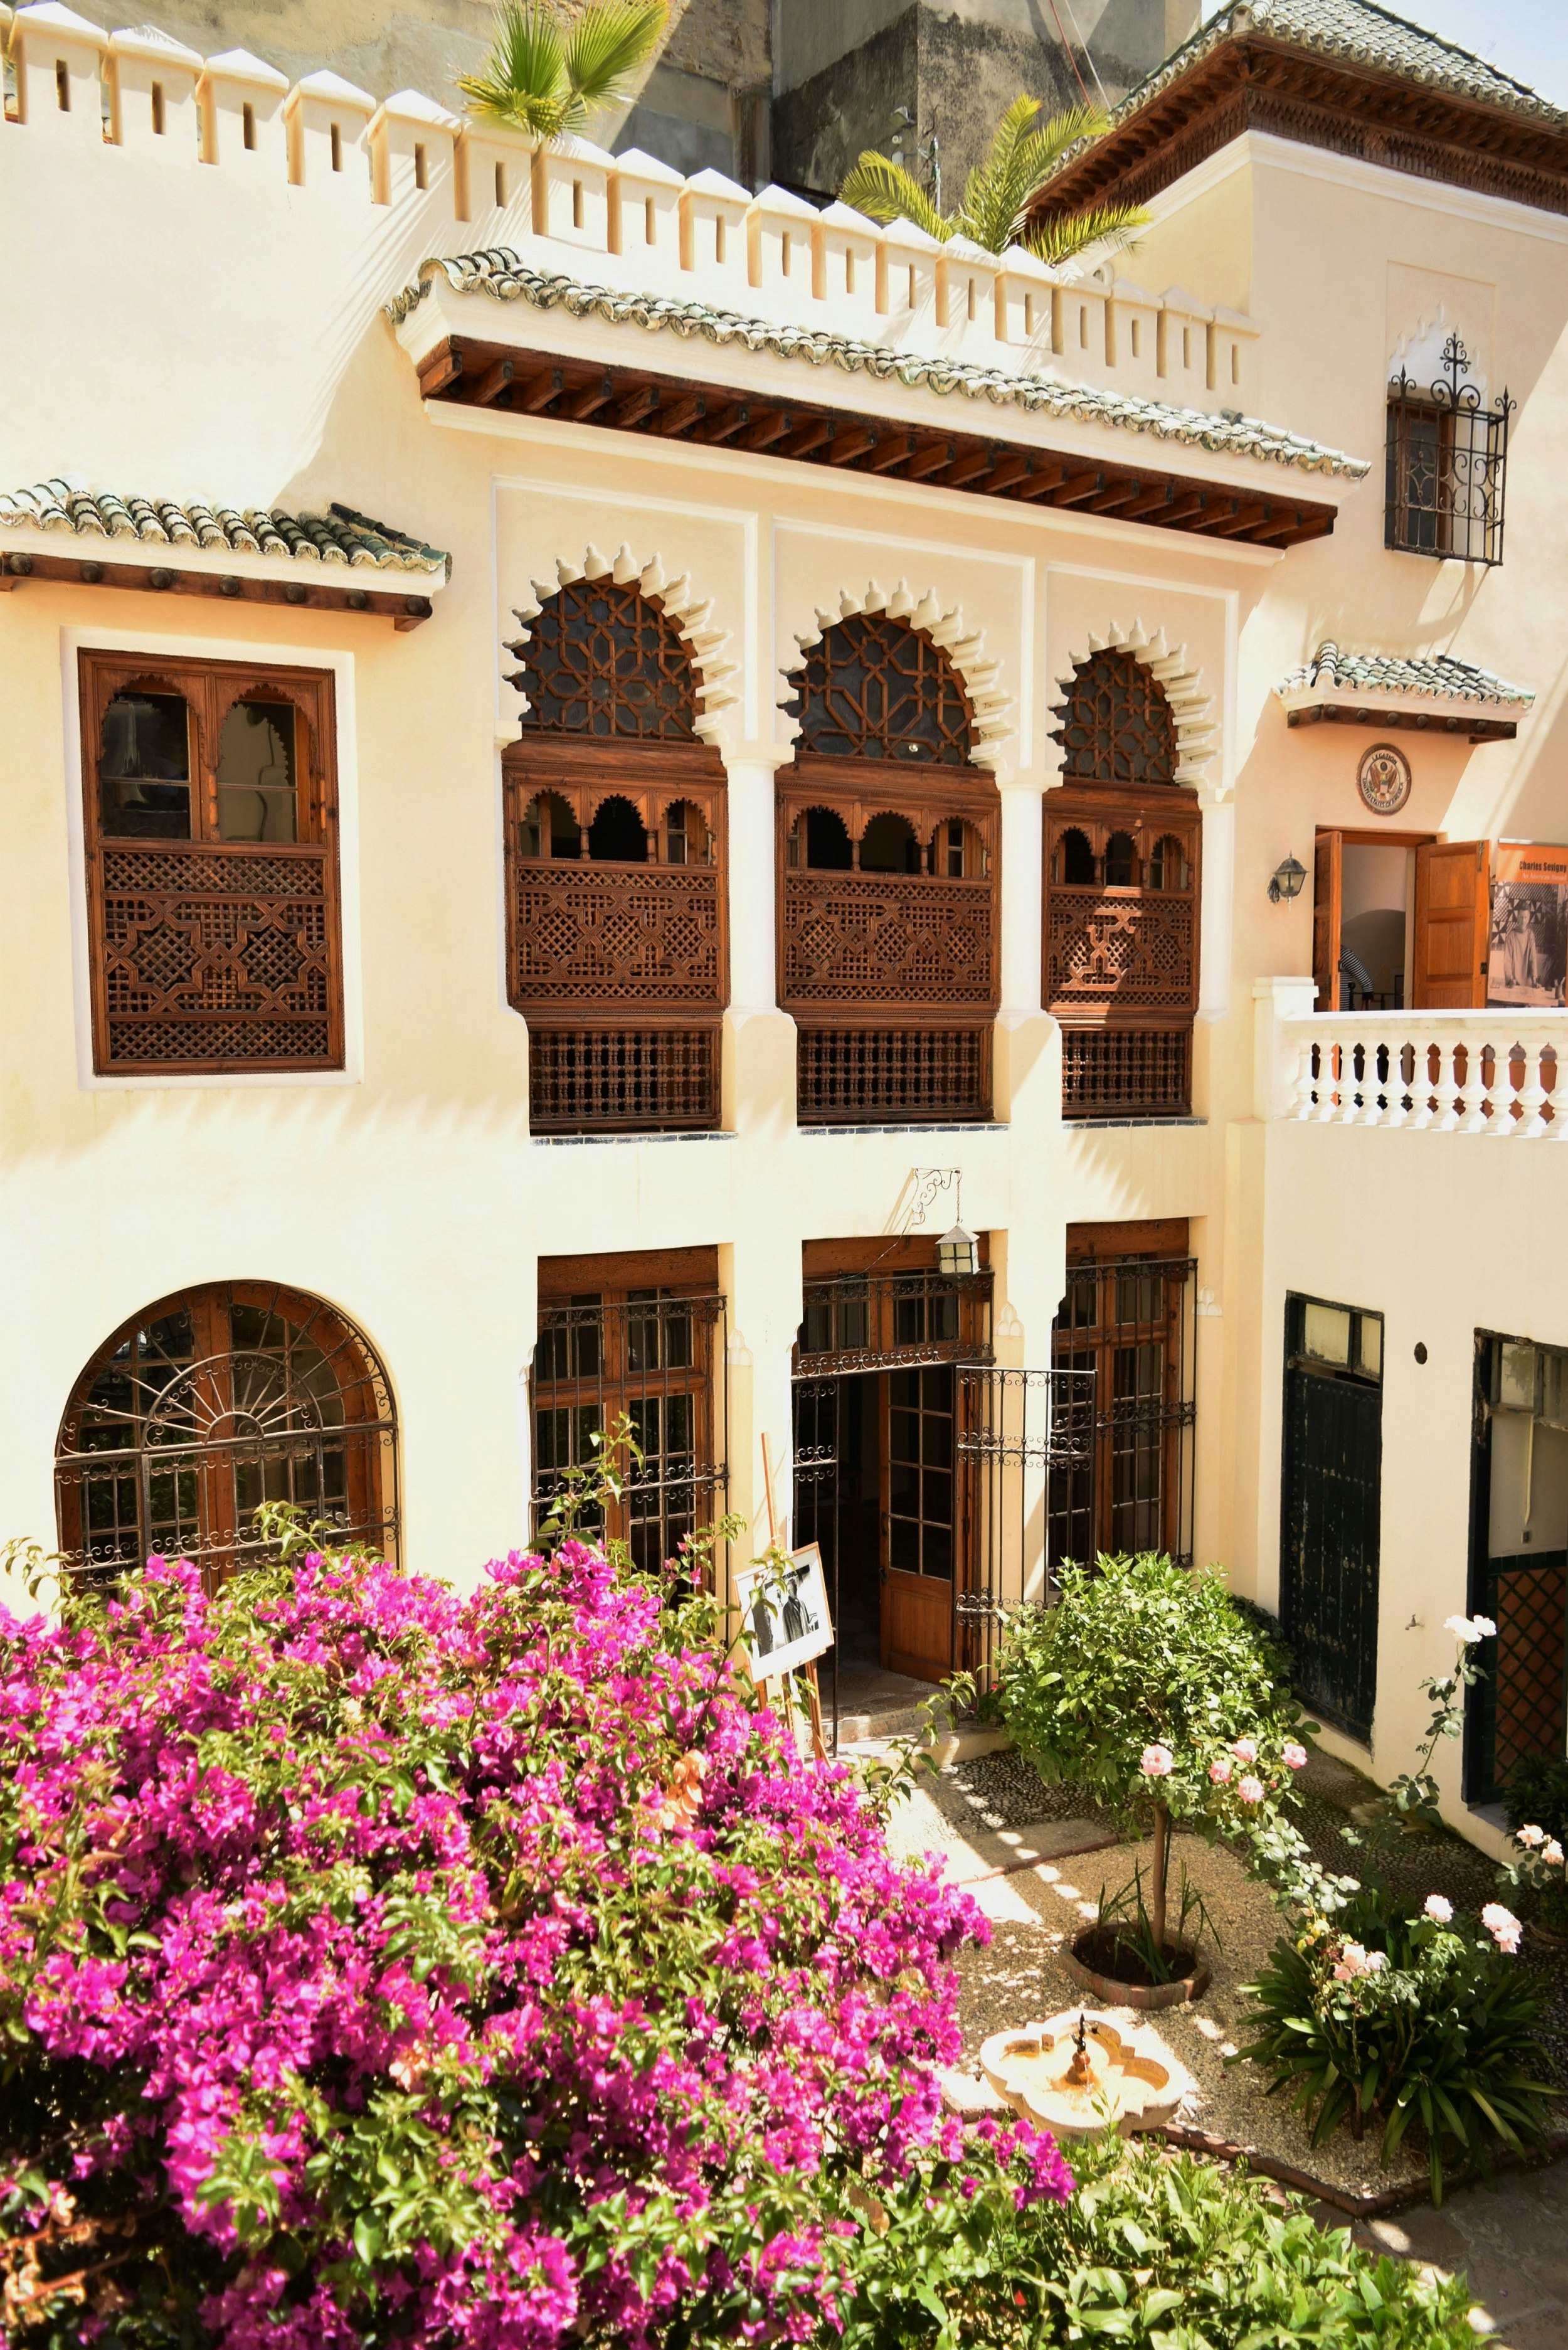 Tangier American Legation Museum; a courtyard view from the second level displaying a well manicured garden. The building features numerous ornate arches with delicately carved wooden lattices within the windows.